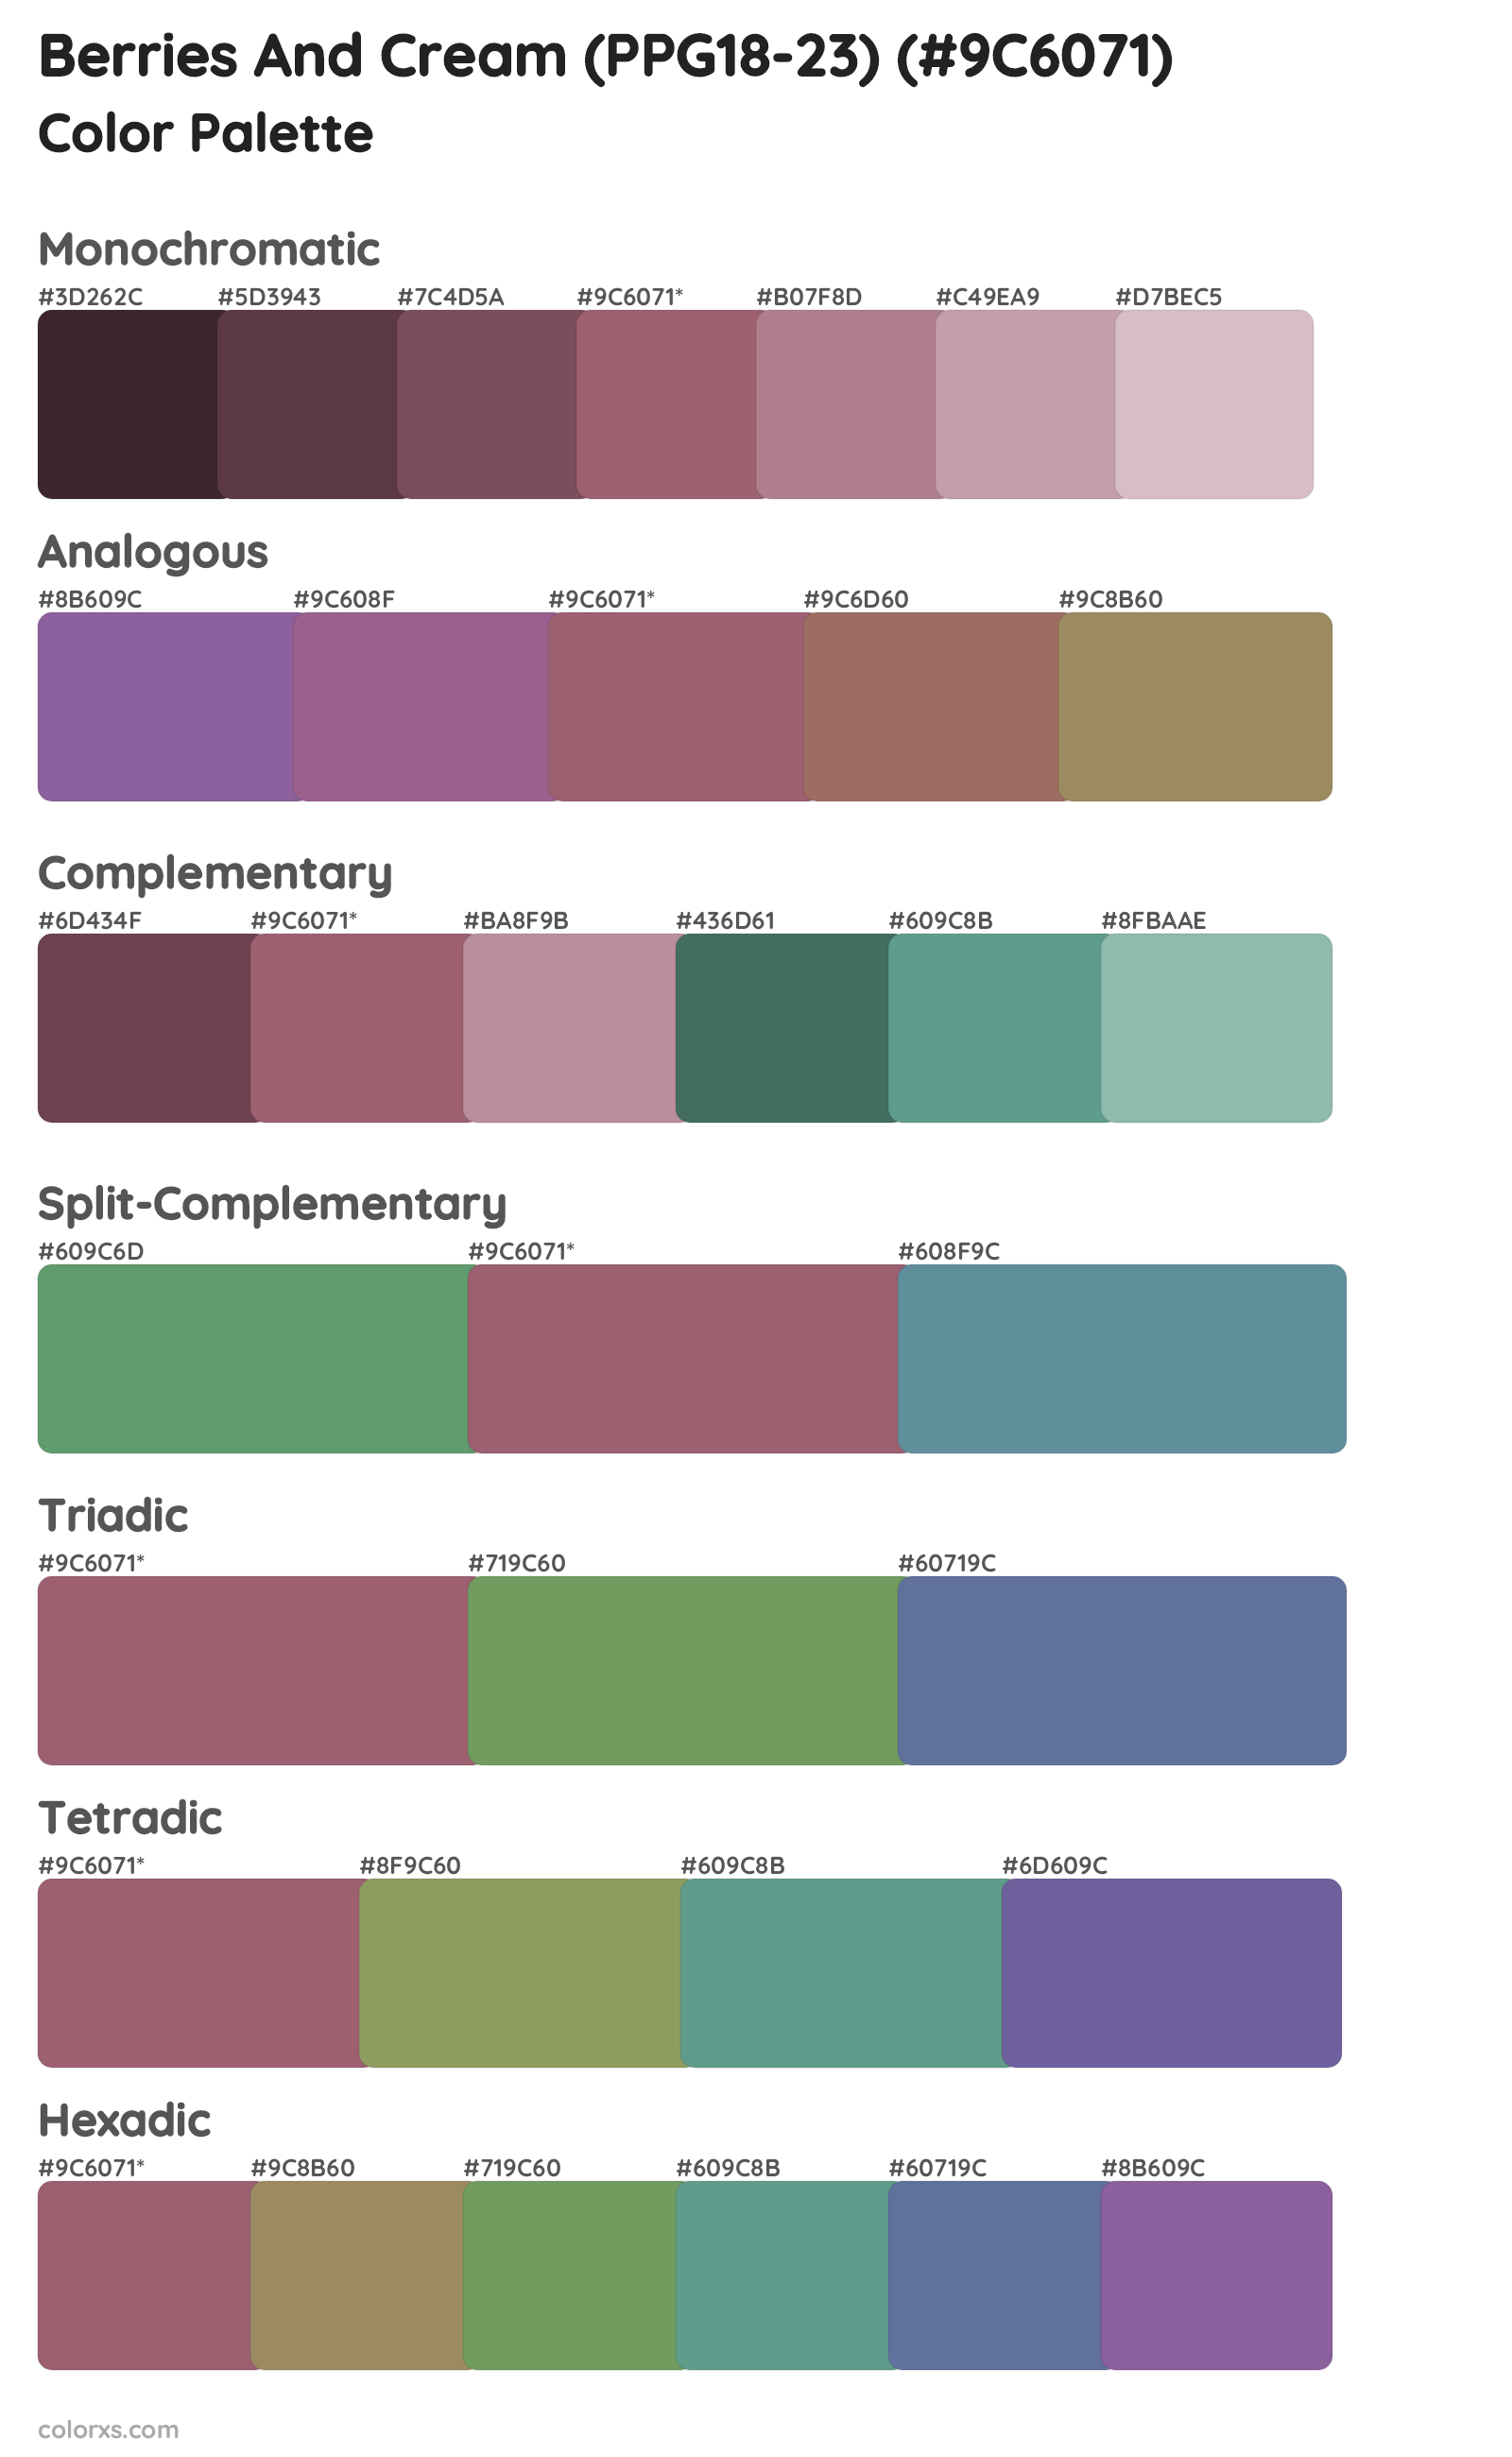 Berries And Cream (PPG18-23) Color Scheme Palettes